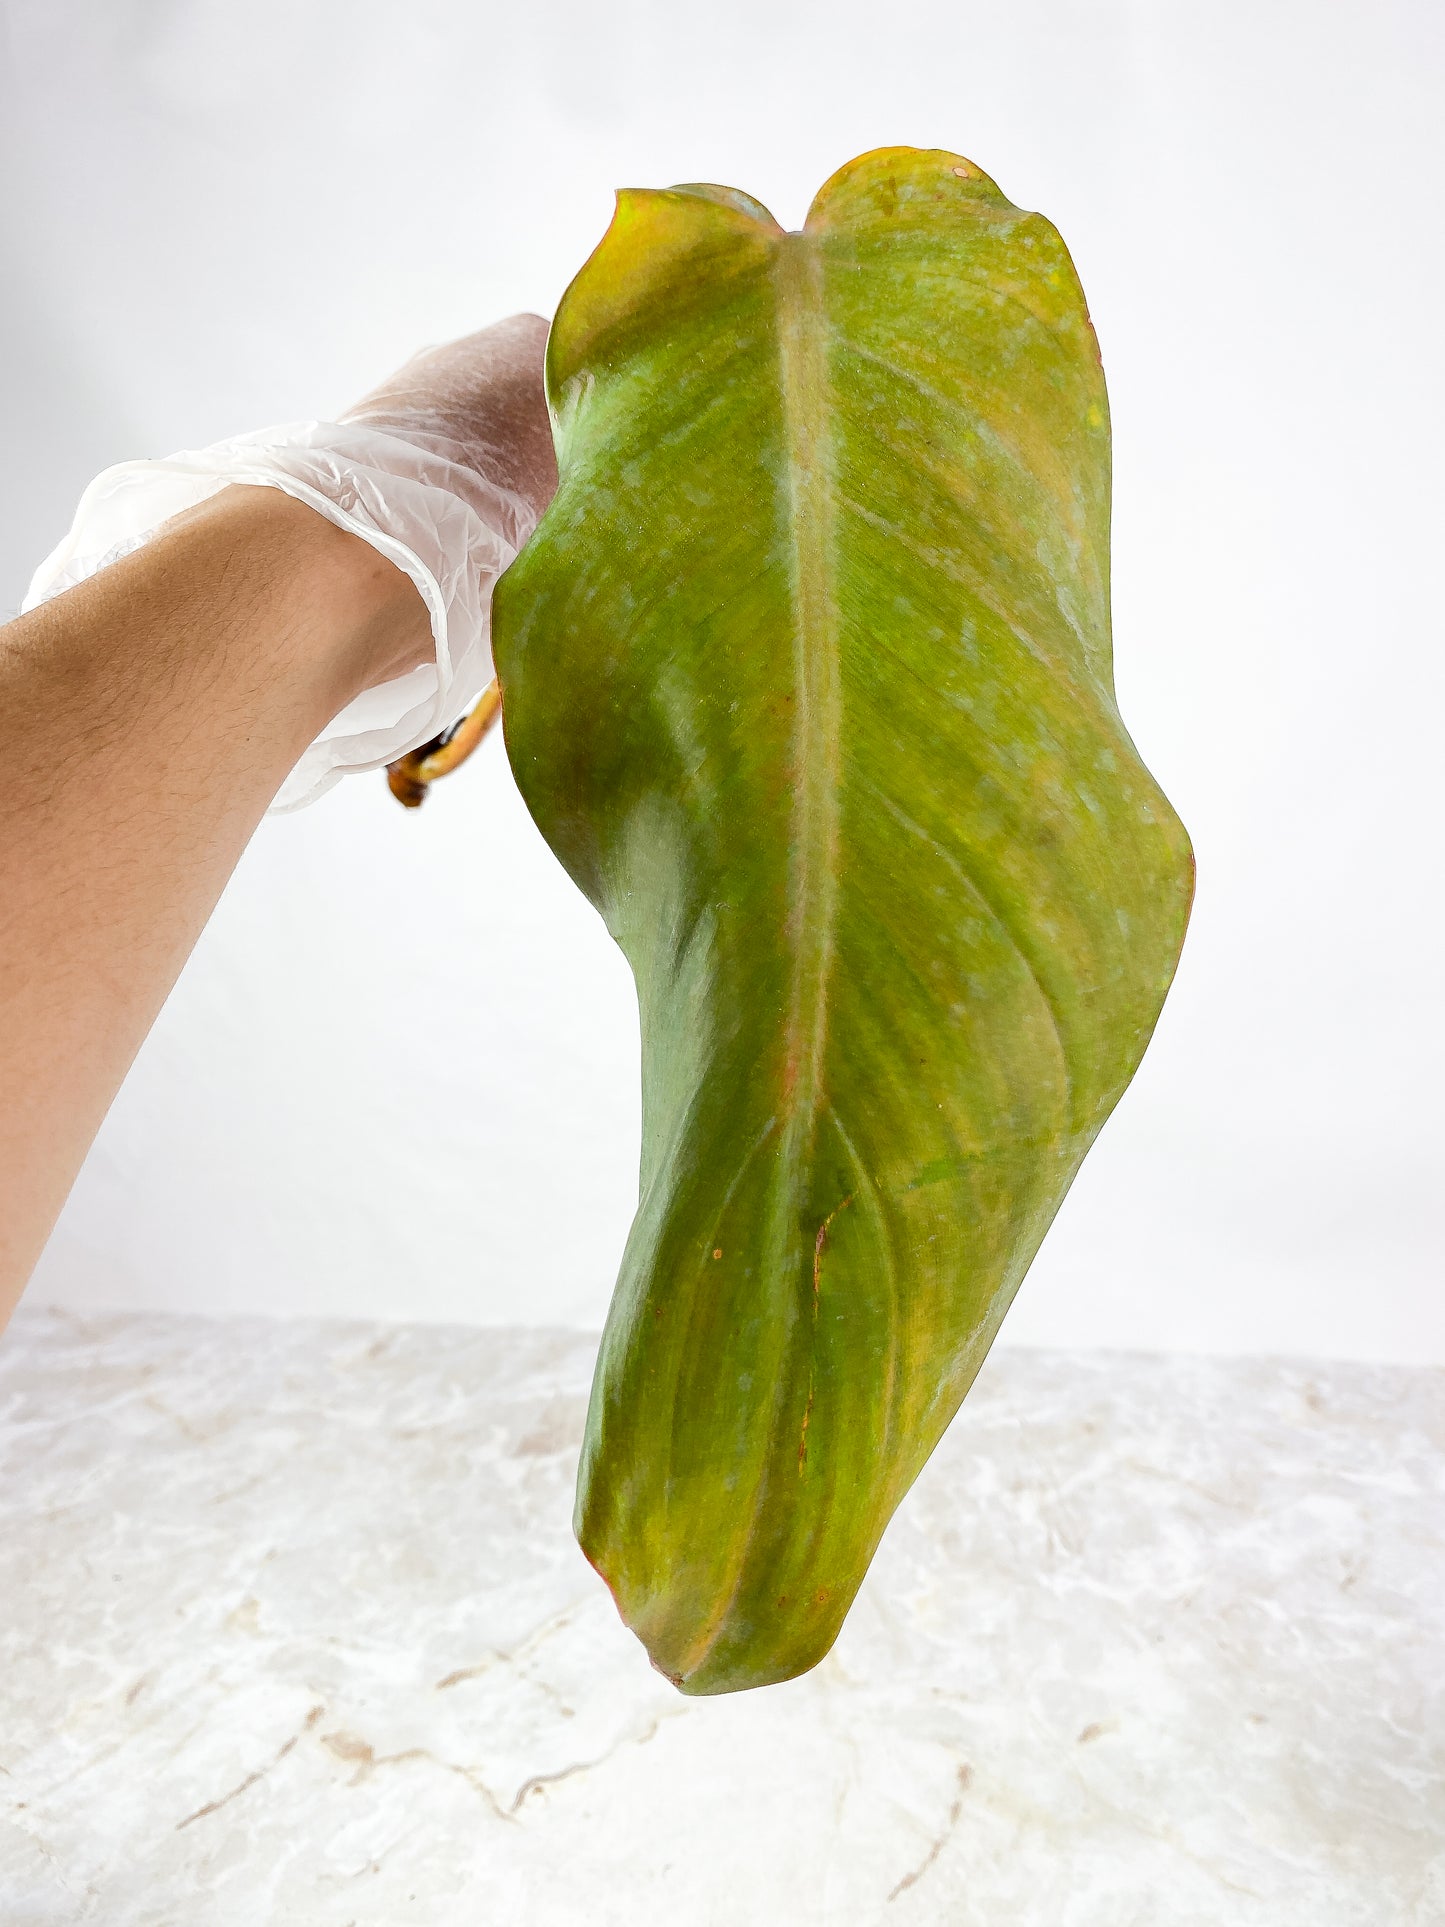 Philodendron orange marmalade unrooted cutting